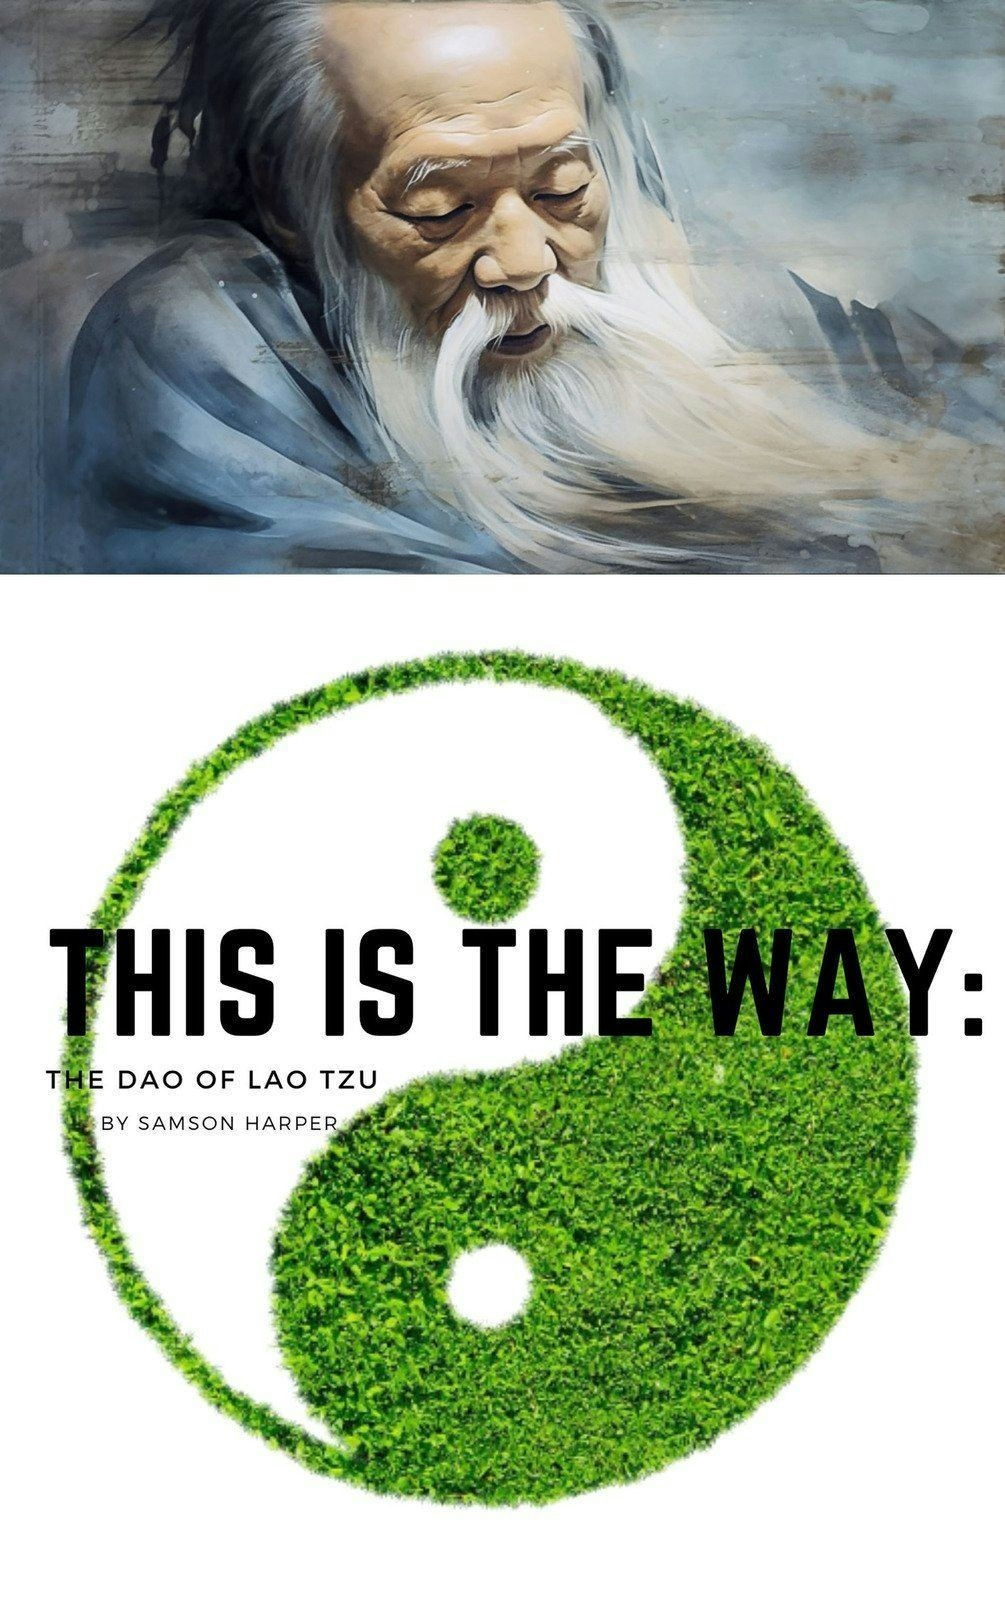 This is the Way: Discover Lao Tzu's Daoist Wisdom